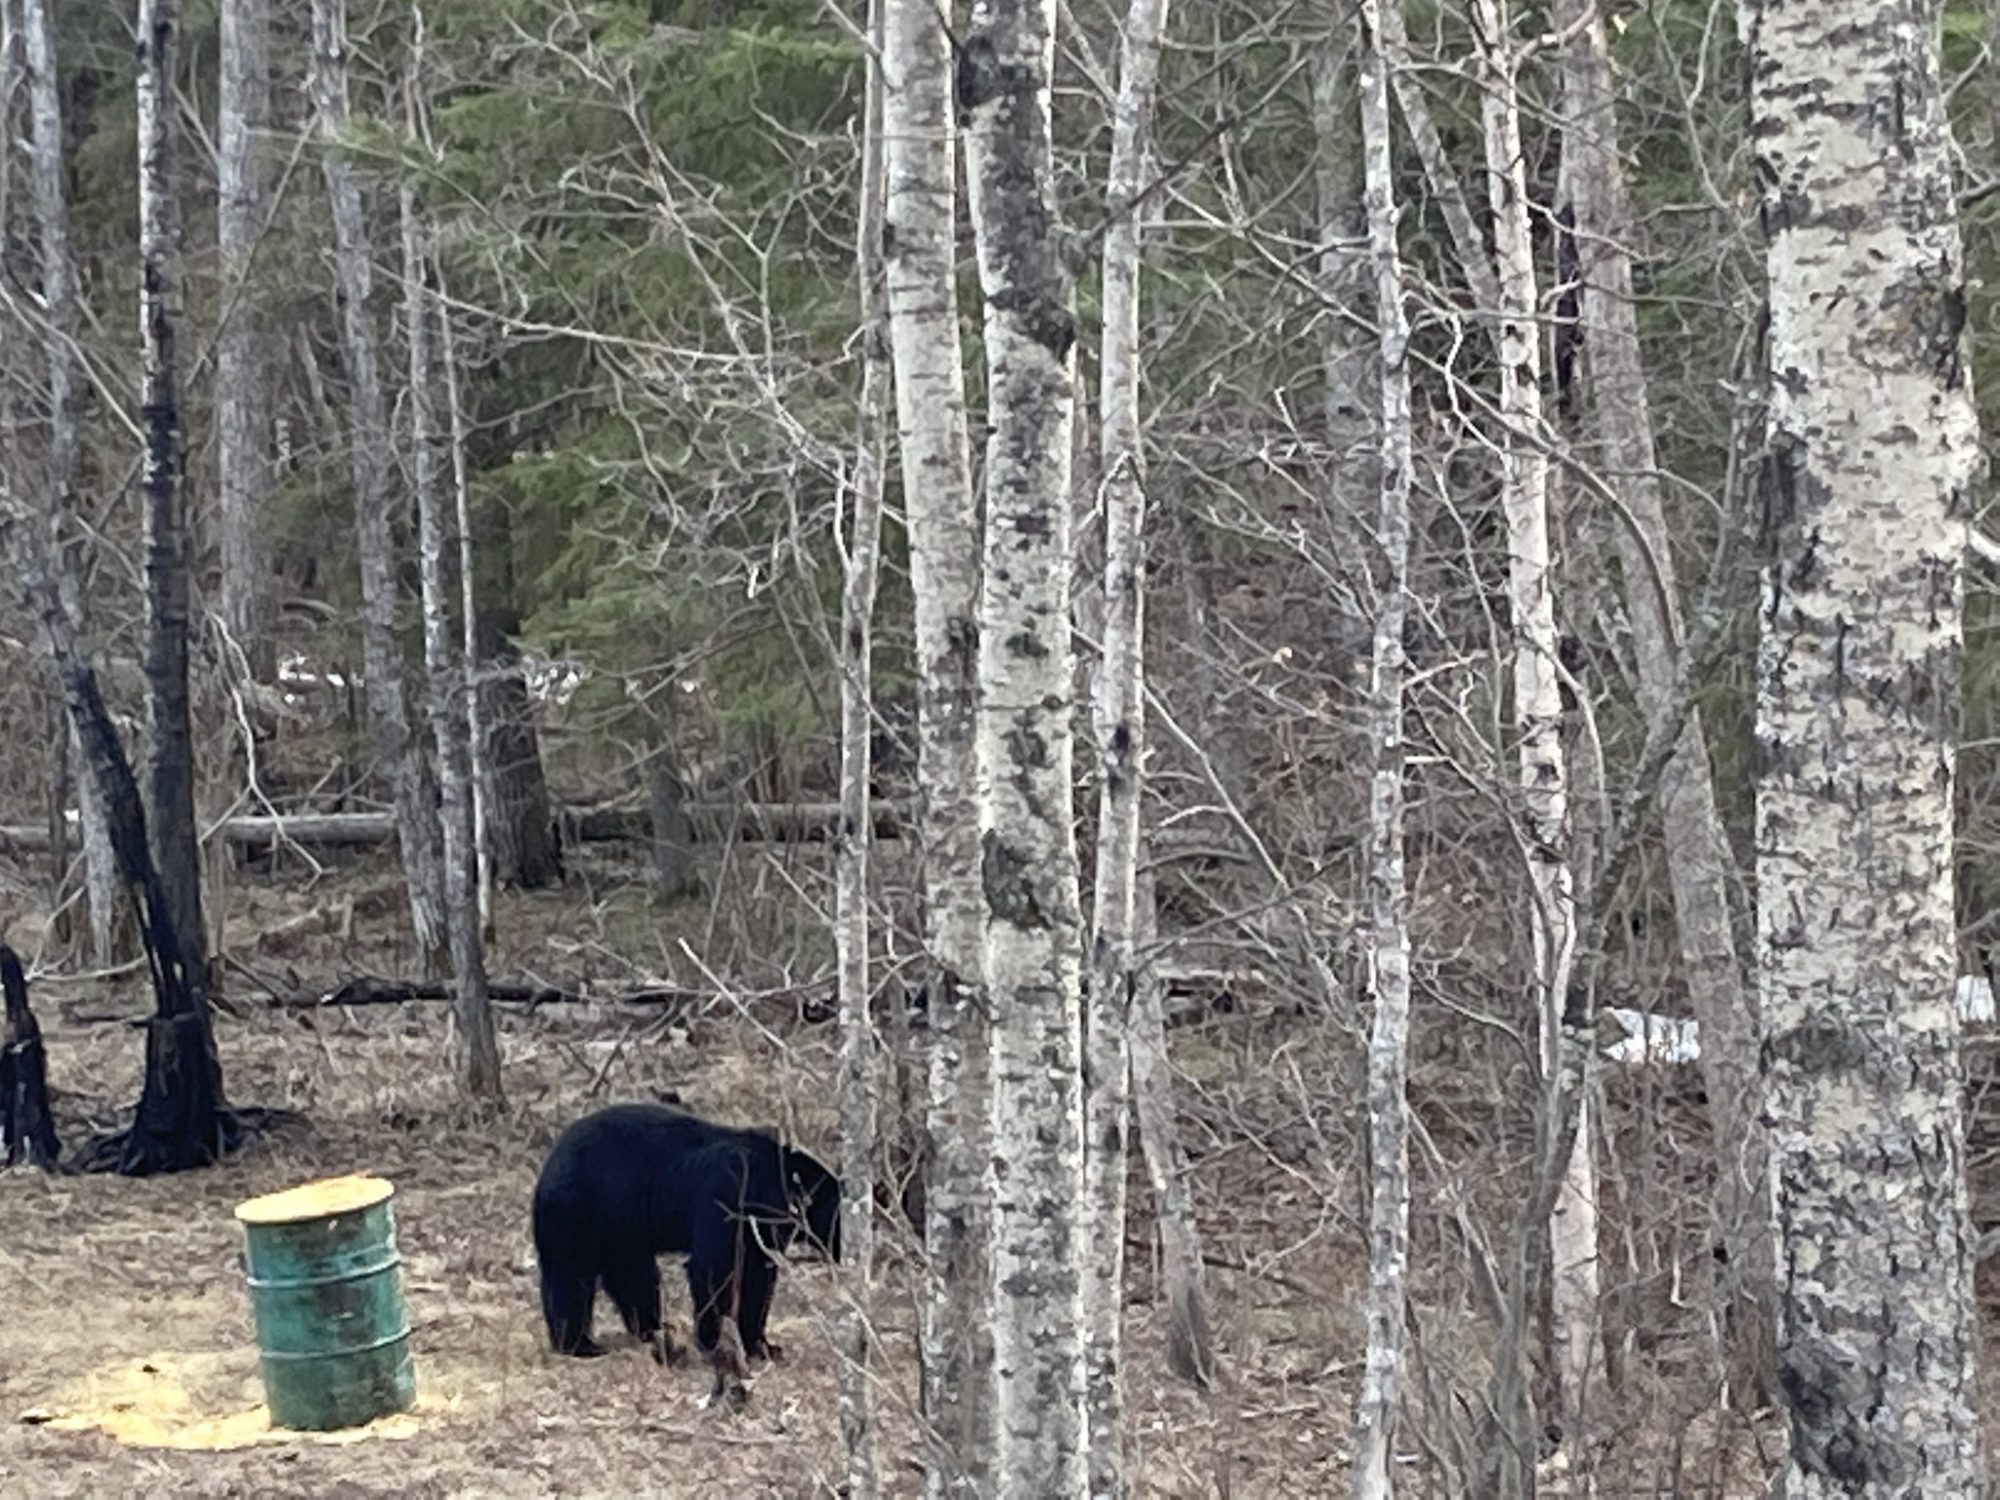 The bait barrel was about 45 yards from us and when the bear arrived at the barrel, I saw that he was as large as the barrel on all fours.